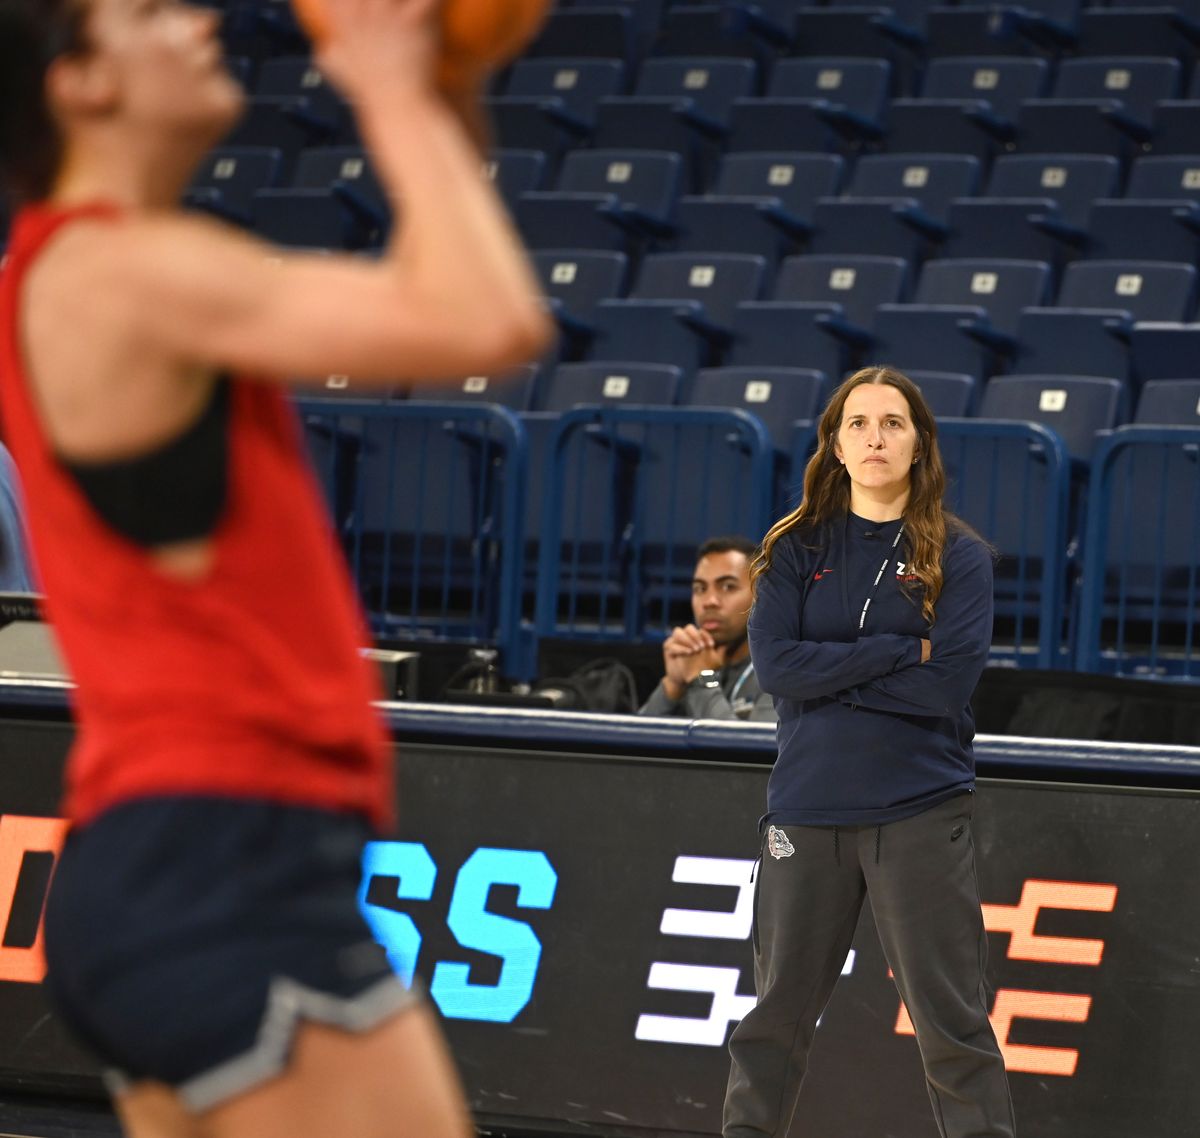 Gonzaga head coach Lisa Fortier watches as her team warms up Friday ahead of Saturday’s NCAA Tournament opening-round game at McCarthey Athletic Center.  (Jesse Tinsley/THE SPOKESMAN-REVI)